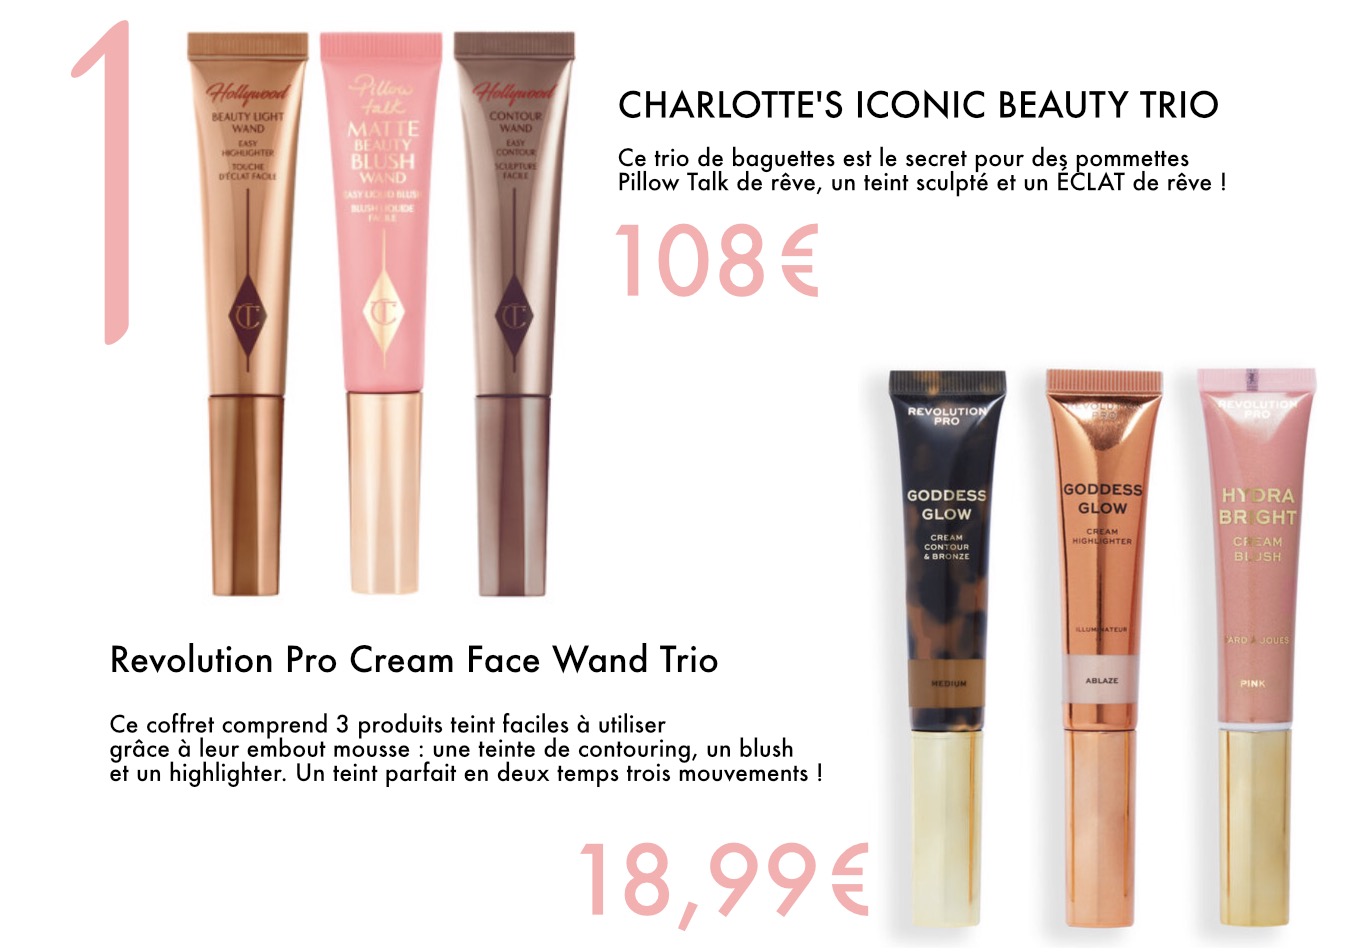 Dupe Charlotte's Iconic Beauty Trio 